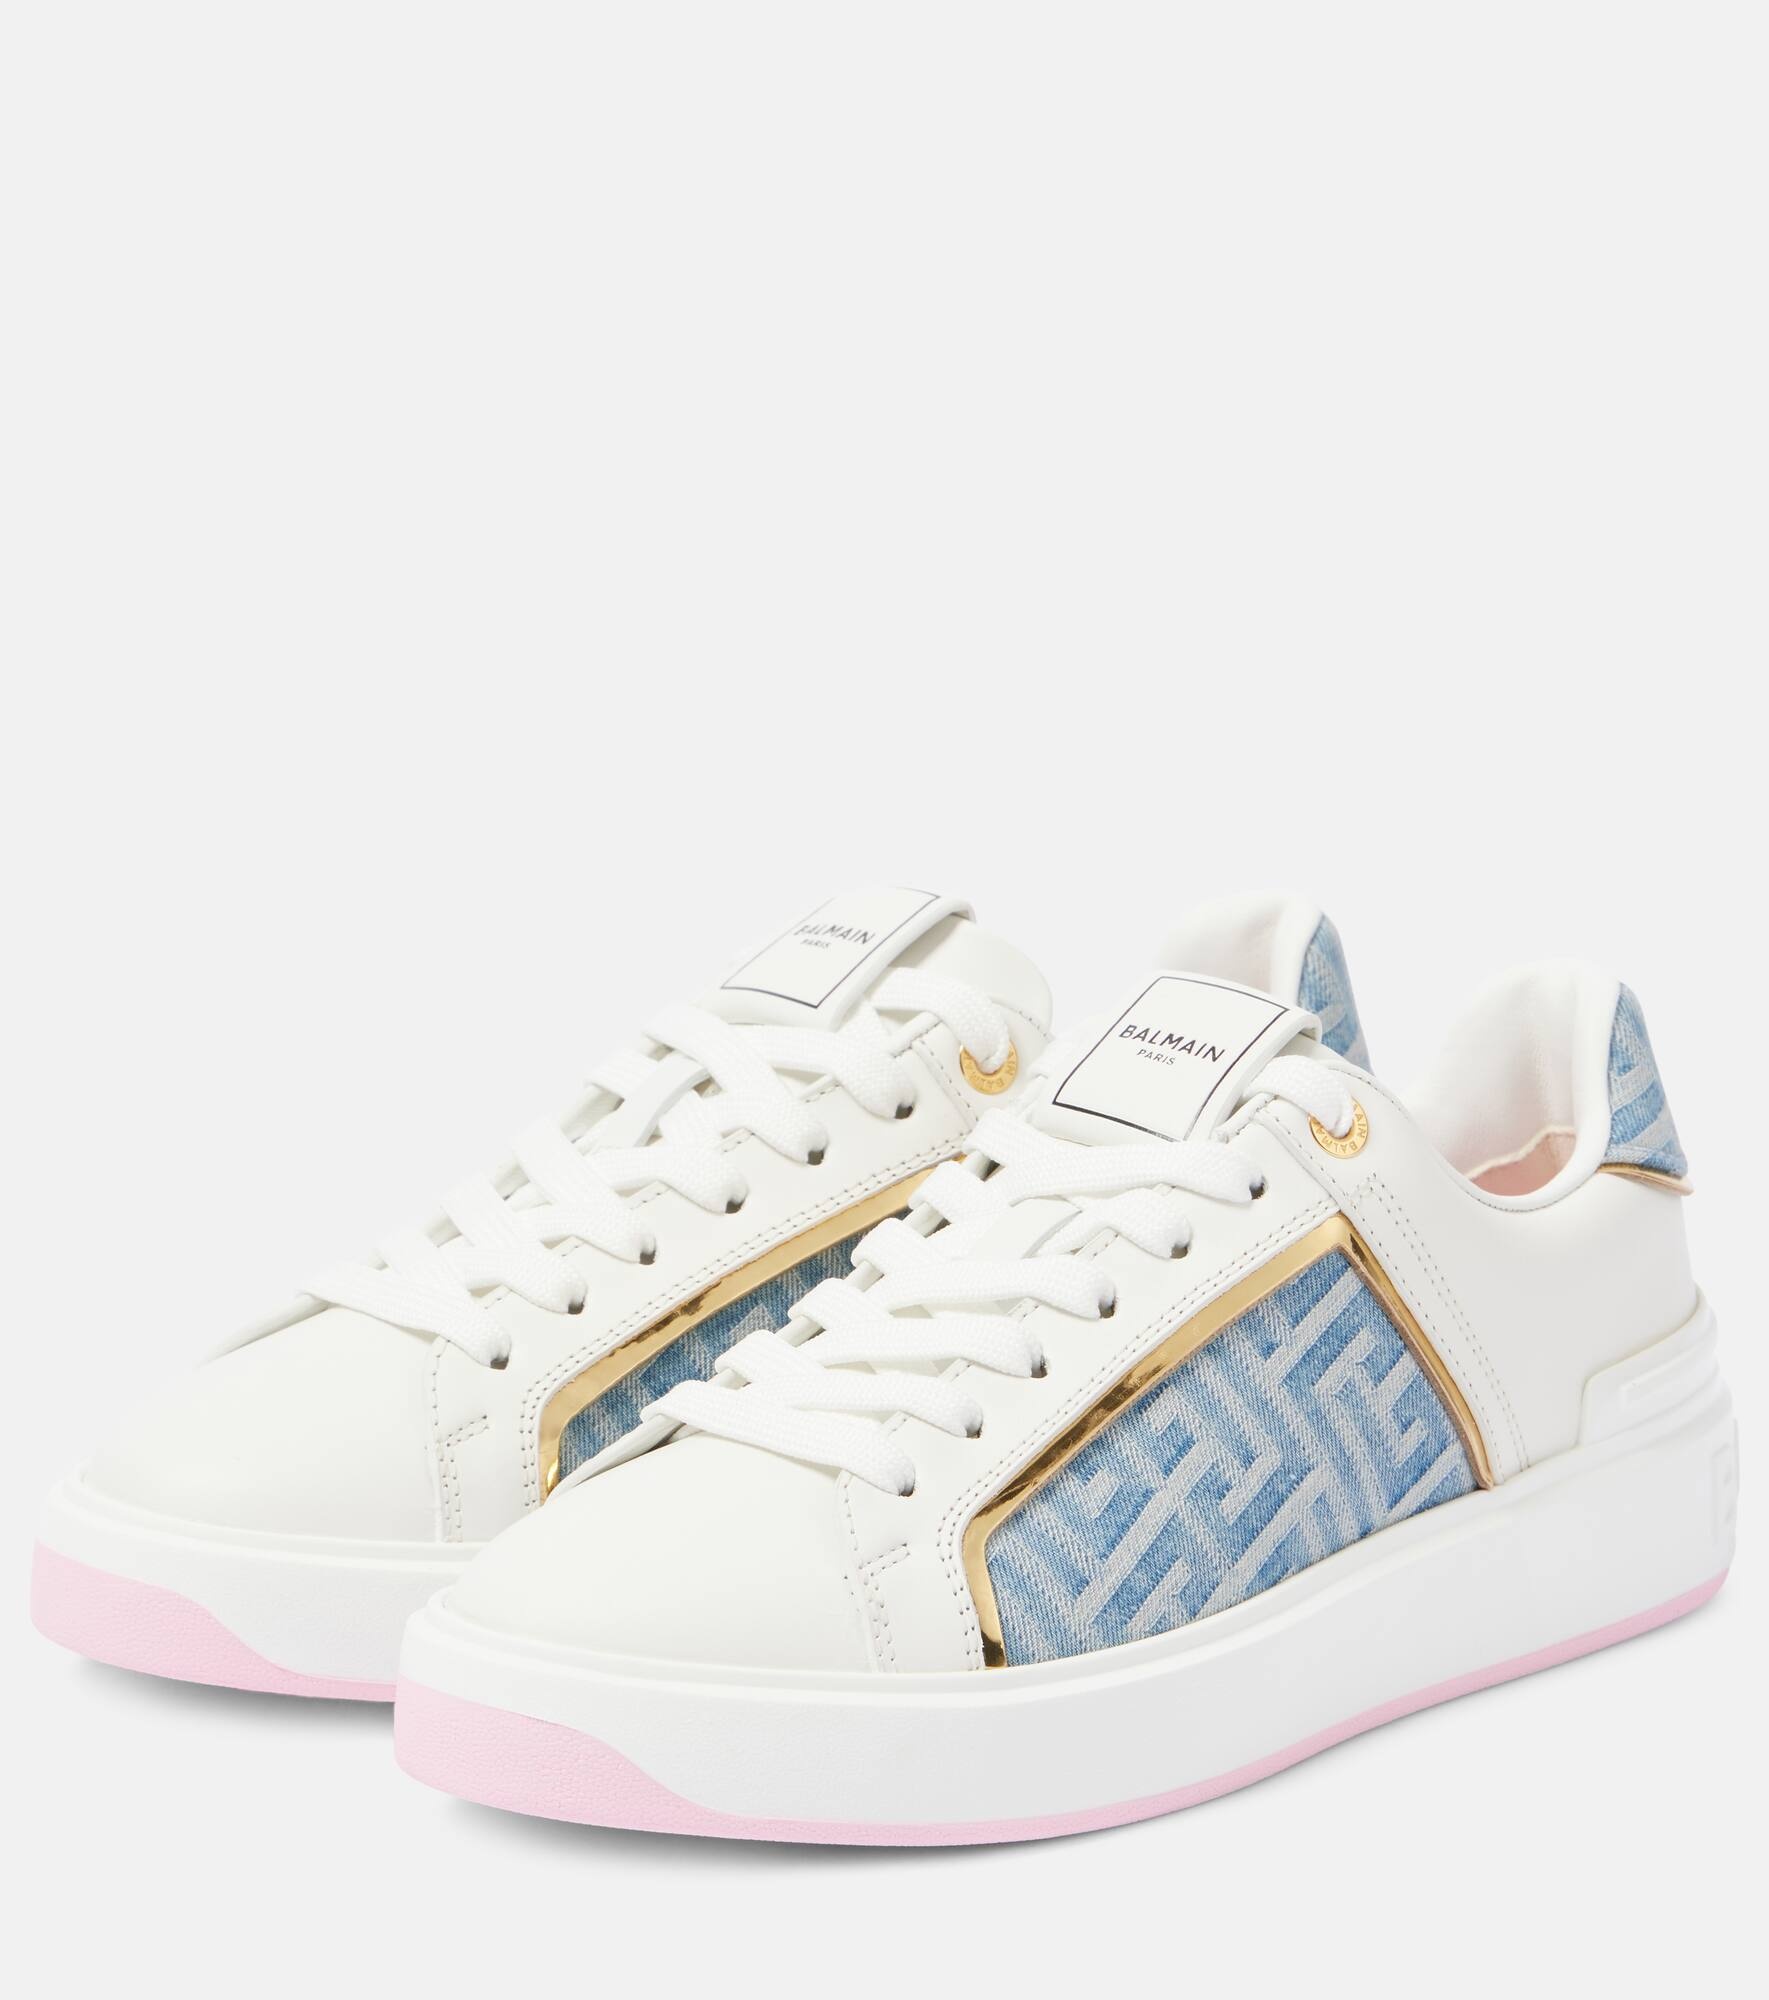 B-Court denim-trimmed leather sneakers - 5